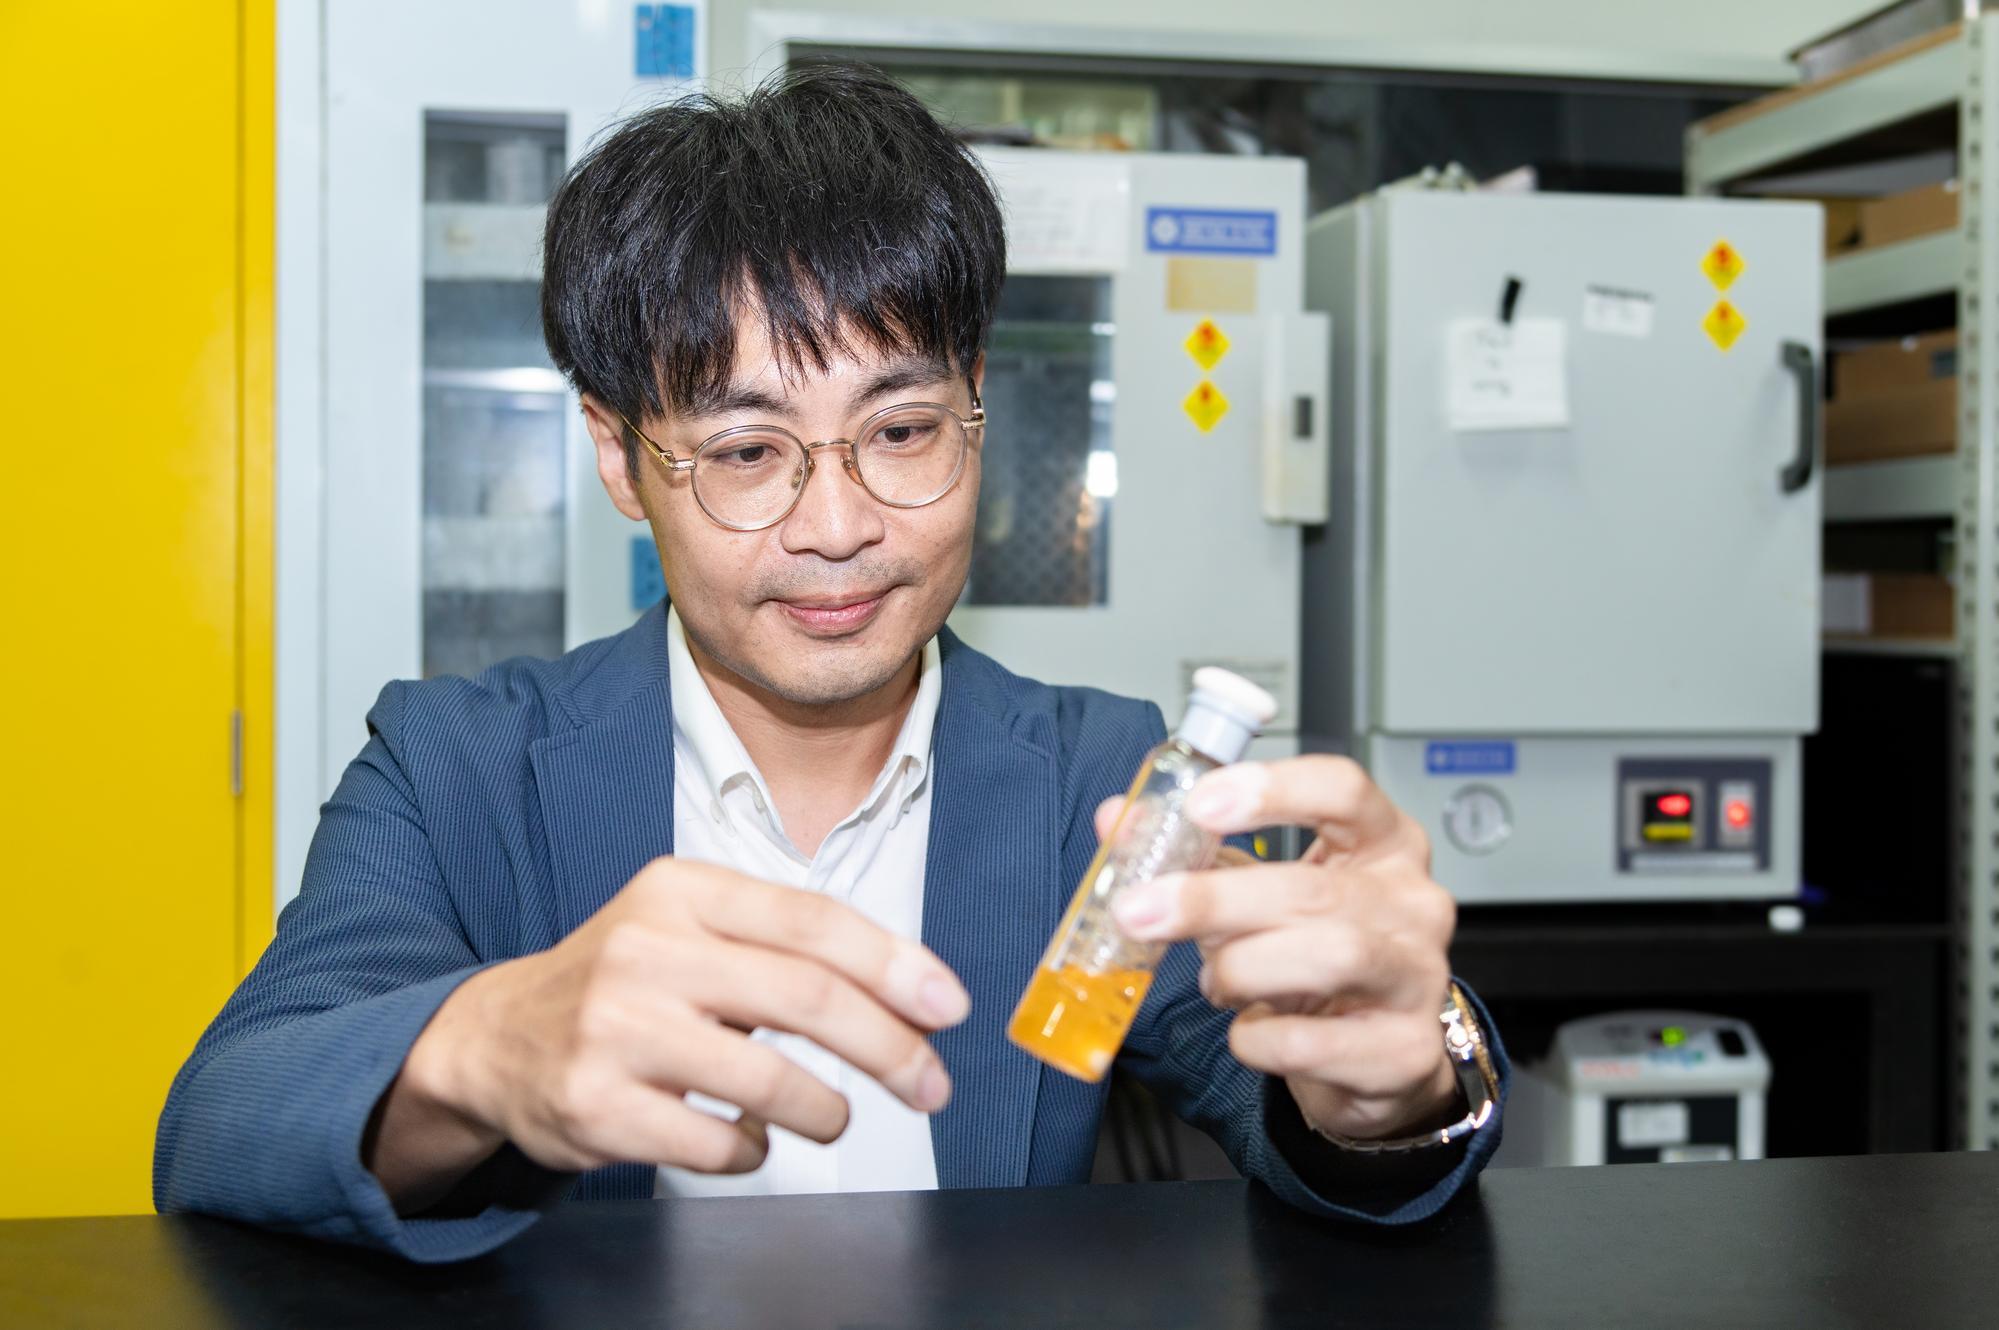 The hydrogen production flask held by Prof. Ho-Hsiu Chou (周鶴修) from NTHU's Department of Chemical Engineering symbolizes the promise of clean energy.